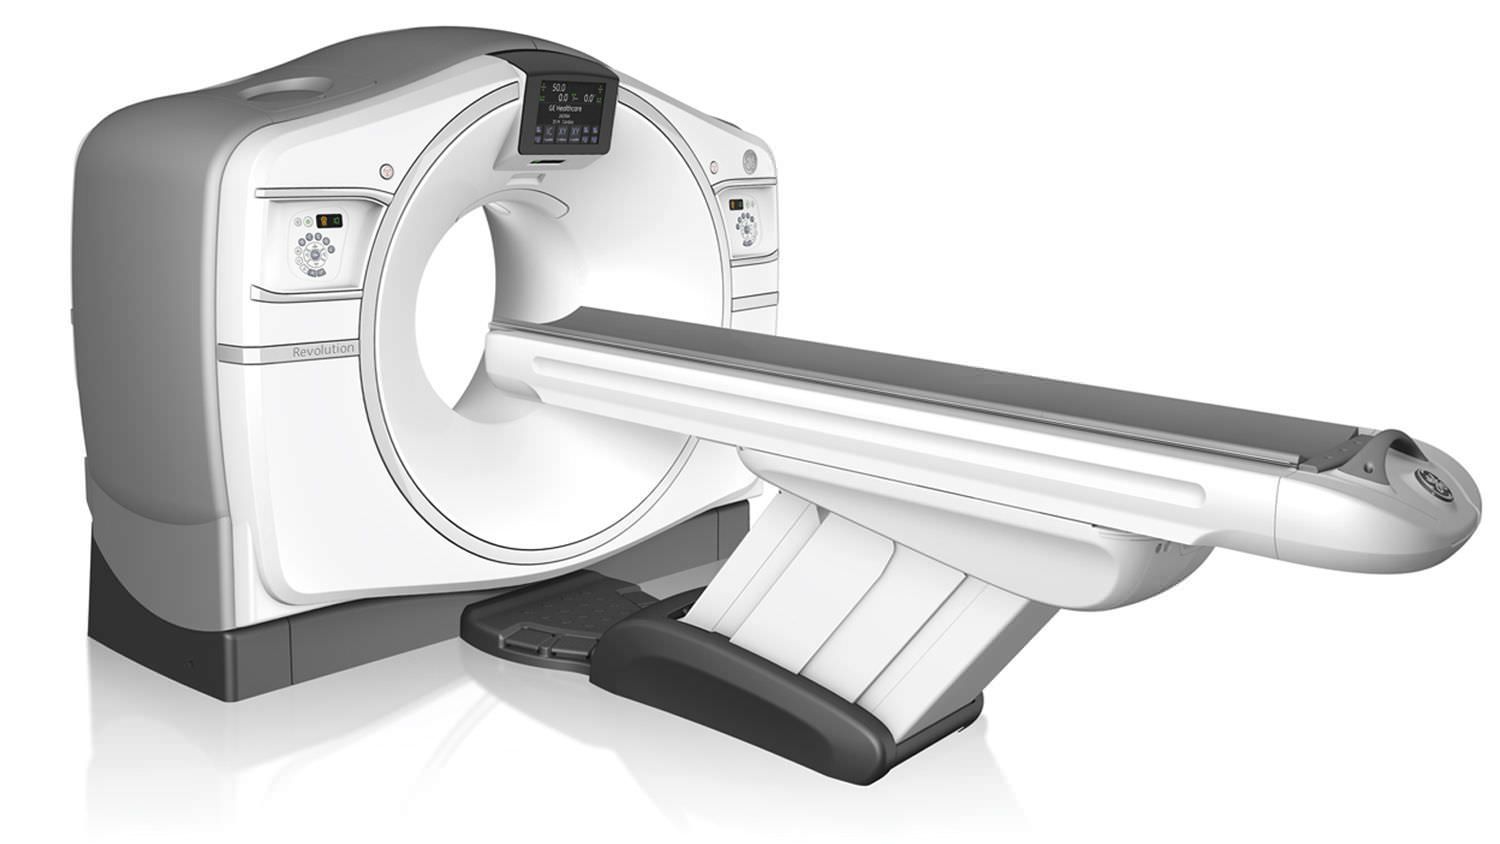 X-ray scanner (tomography) / full body tomography Revolution GSI GE Healthcare